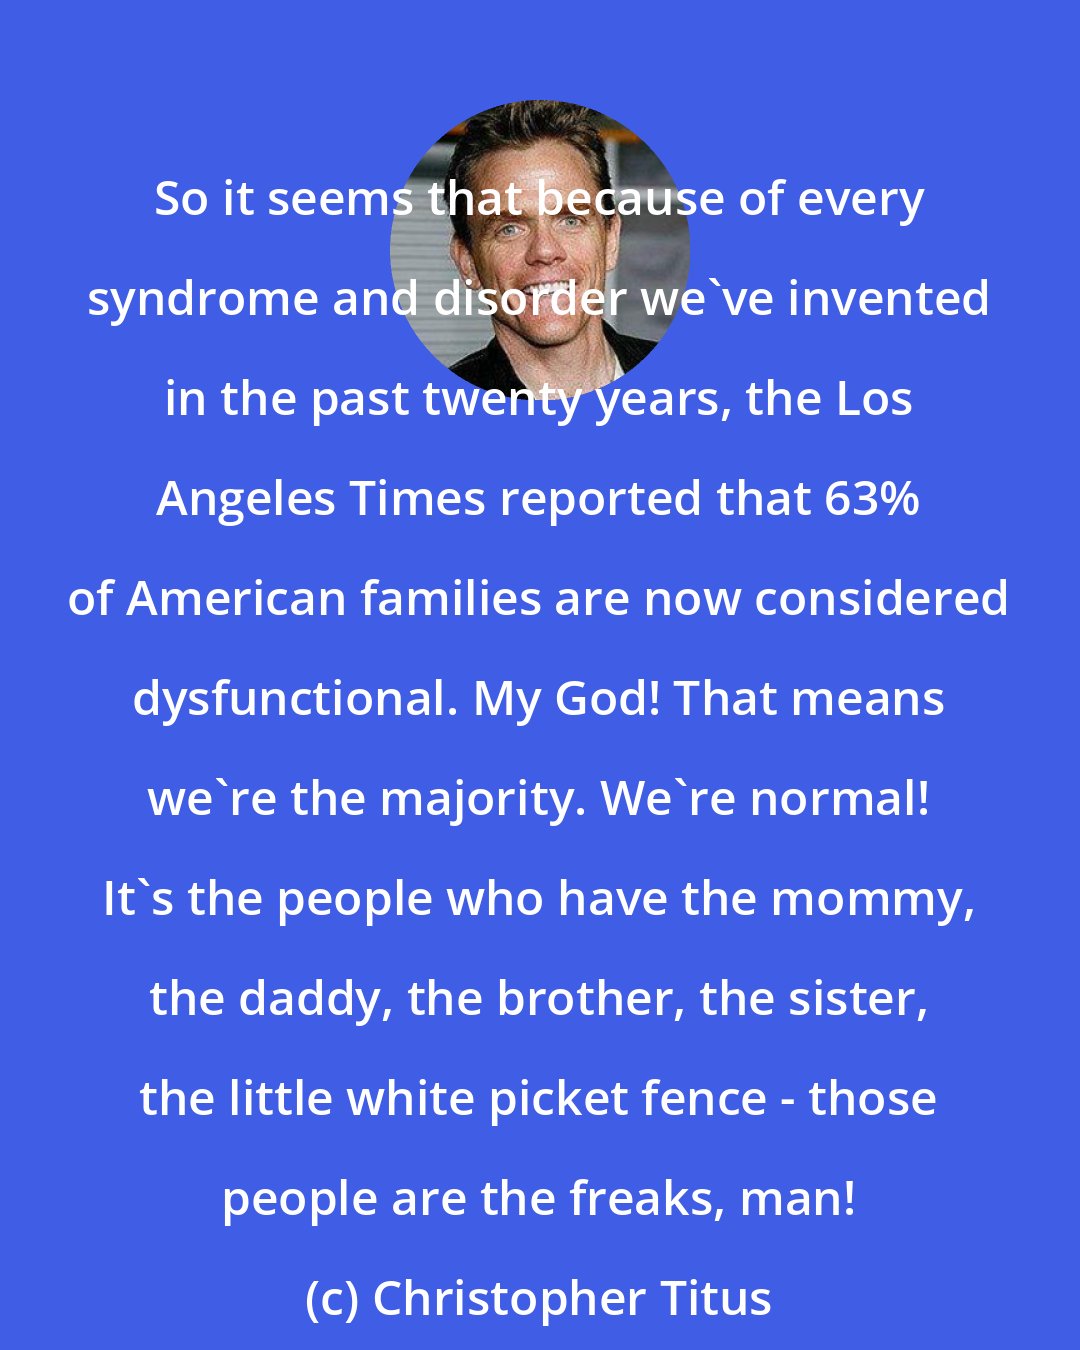 Christopher Titus: So it seems that because of every syndrome and disorder we've invented in the past twenty years, the Los Angeles Times reported that 63% of American families are now considered dysfunctional. My God! That means we're the majority. We're normal! It's the people who have the mommy, the daddy, the brother, the sister, the little white picket fence - those people are the freaks, man!